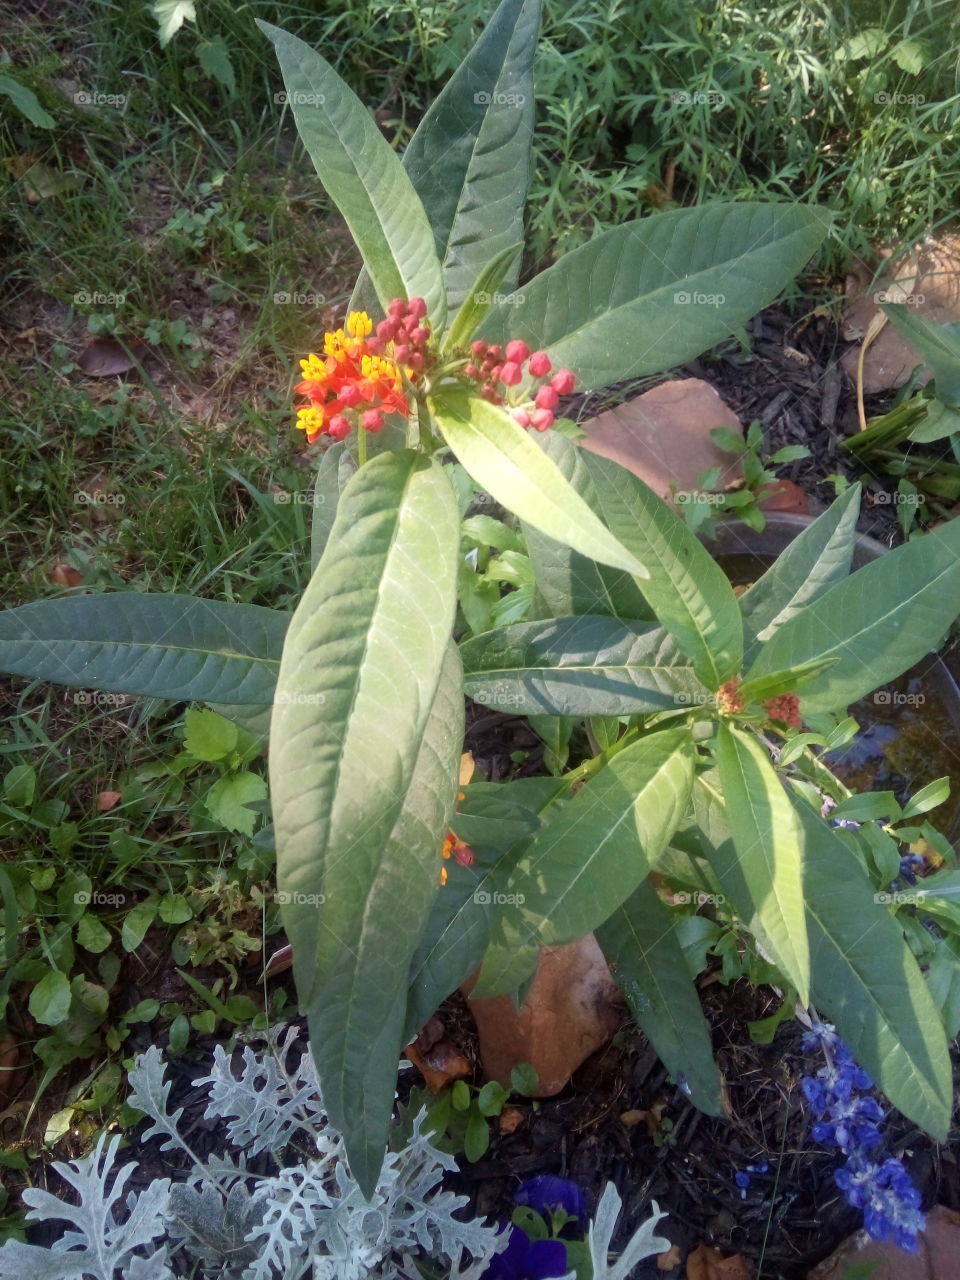 first time ever growing milkweed just for the monarch butterflies. a place just for them.